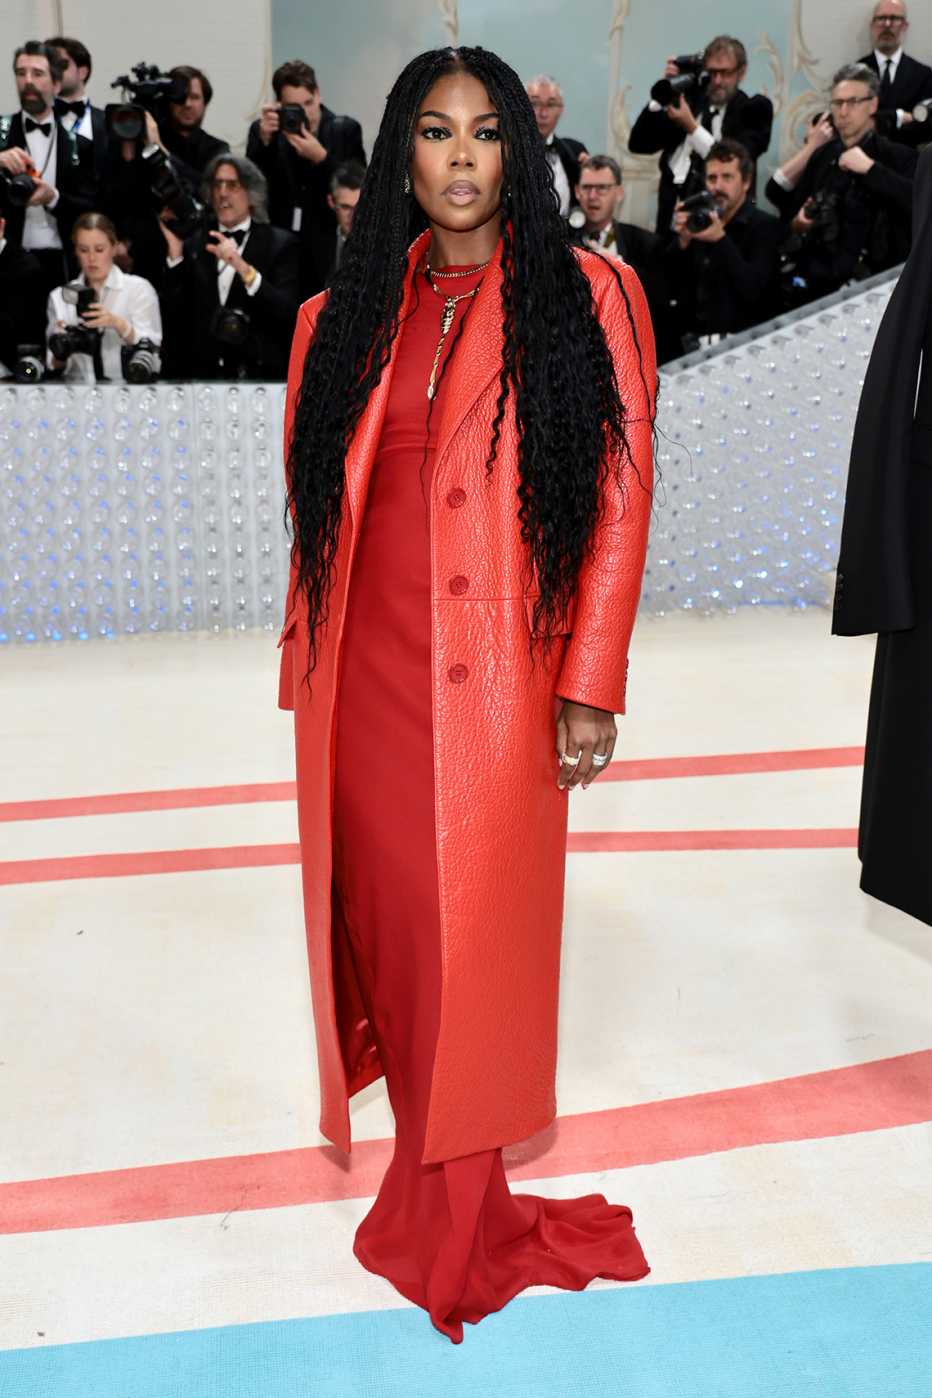 Actress Gabrielle Union at The 2023 Met Gala held at The Metropolitan Museum of Art in New York City